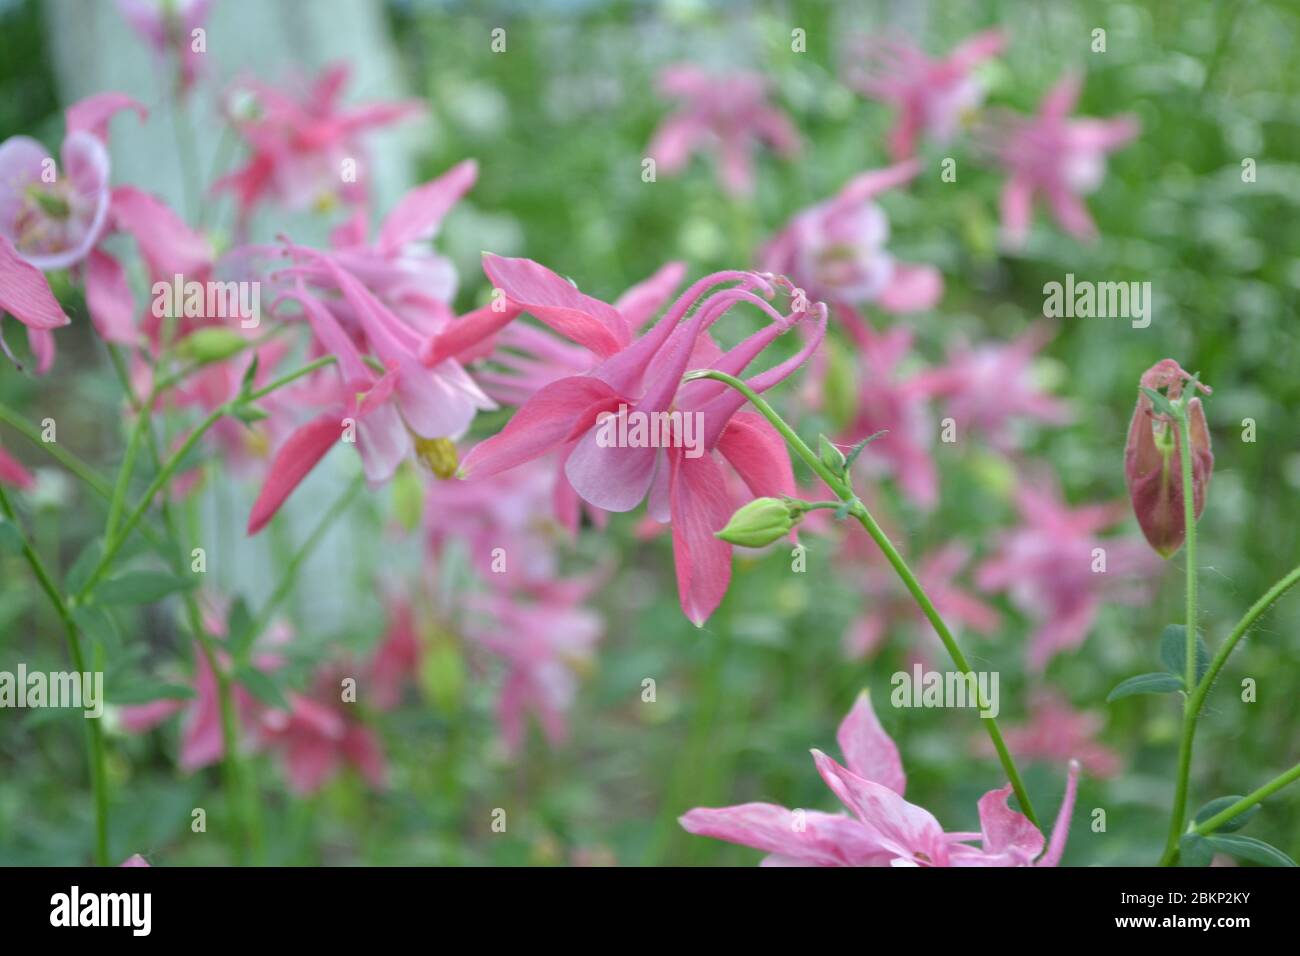 Cute garden plants. Flower garden, bed. Beautiful spring flowers. Sunny. Green bushes. Aquilégia, grassy perennial plants(Ranunculaceae). Pink inflore Stock Photo